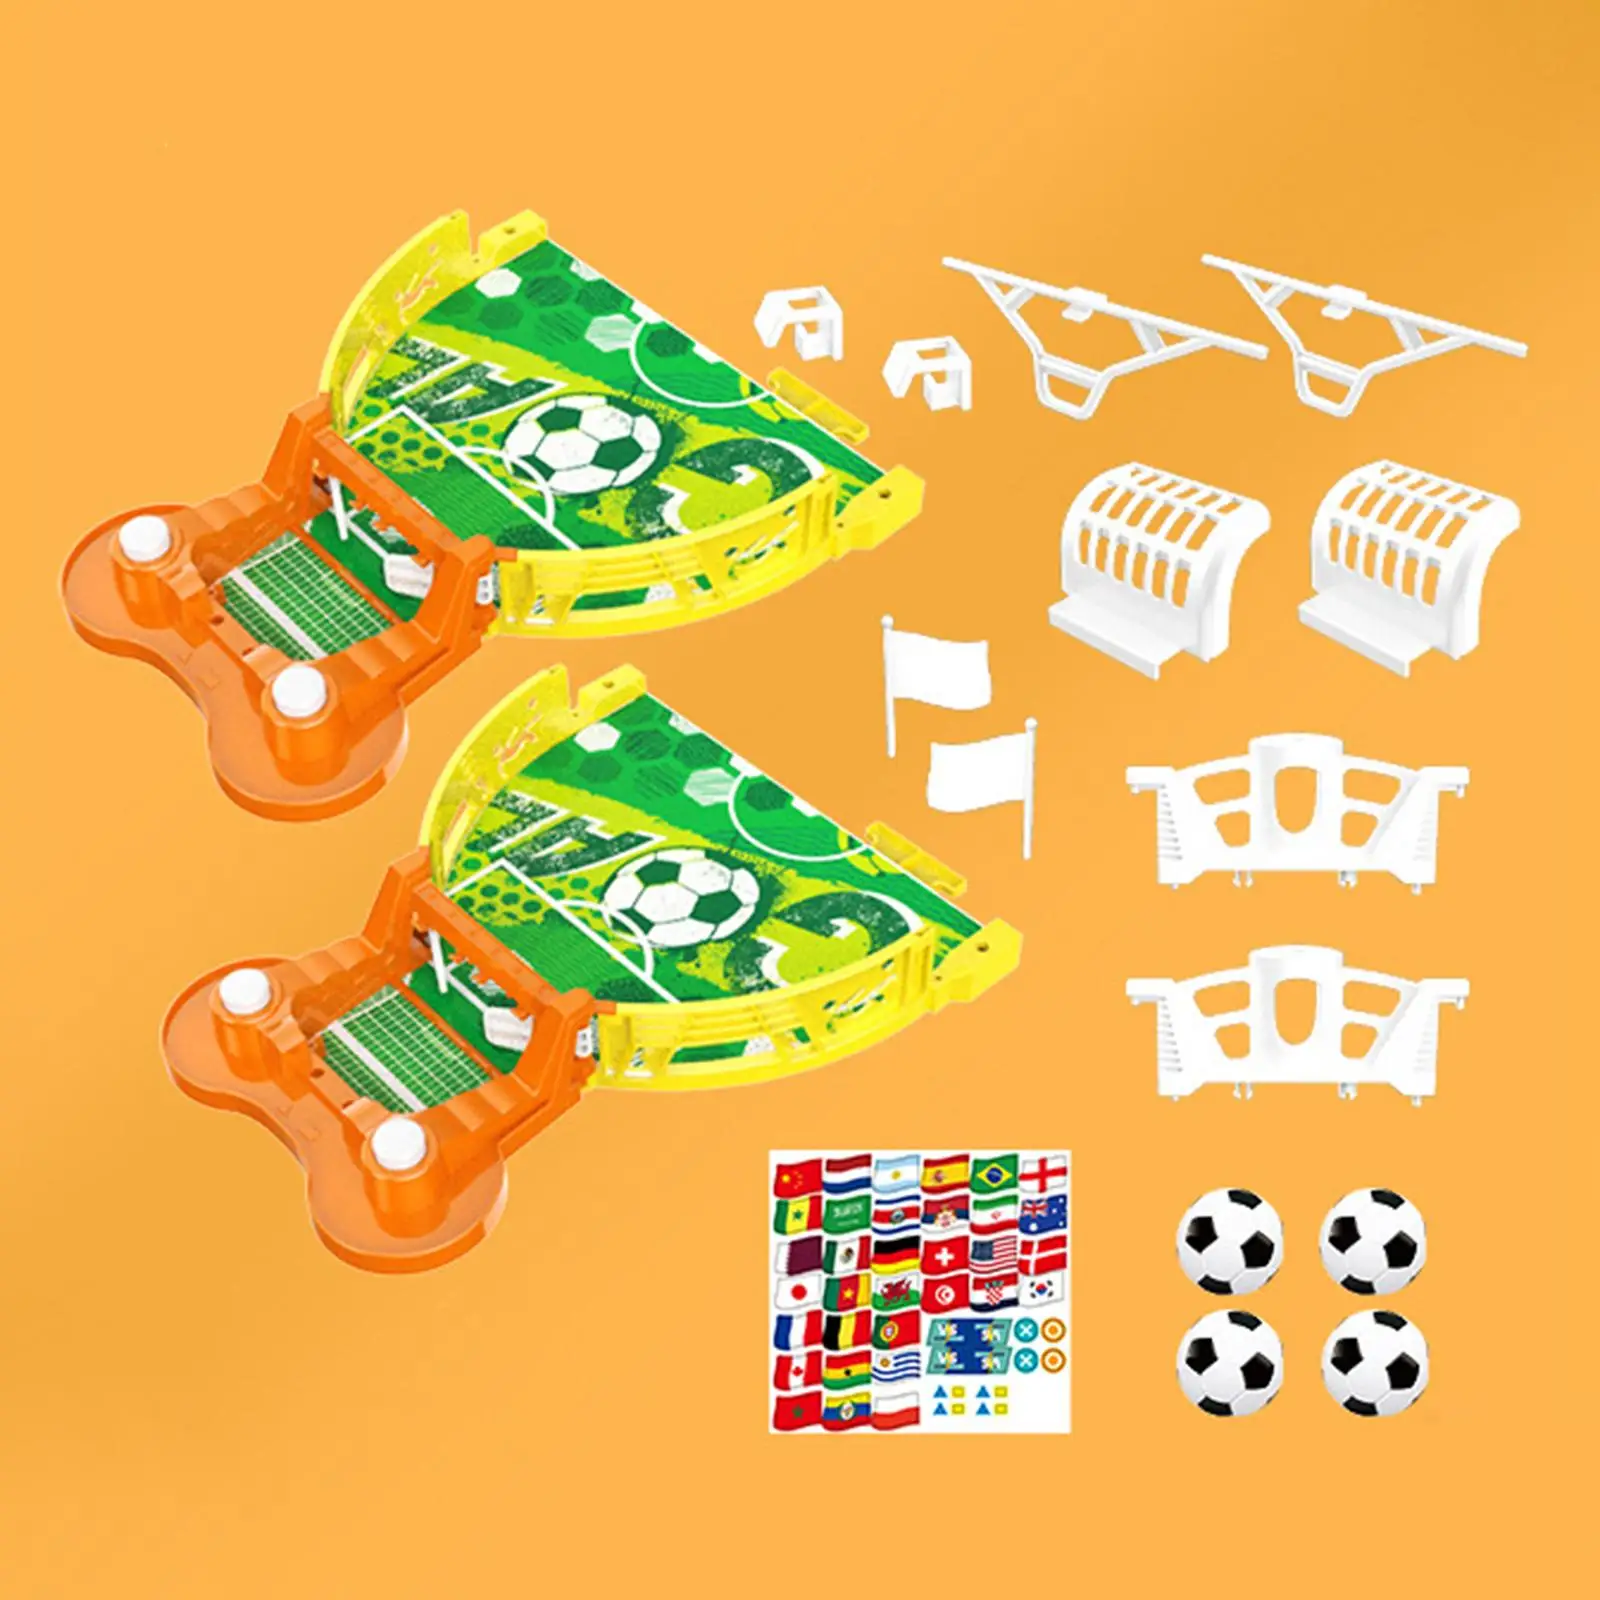 Desktop Sport Board Game Arcade Portable Tabletop Football Game Toy for Boy Girls Party Entertainment Kids Adults Family